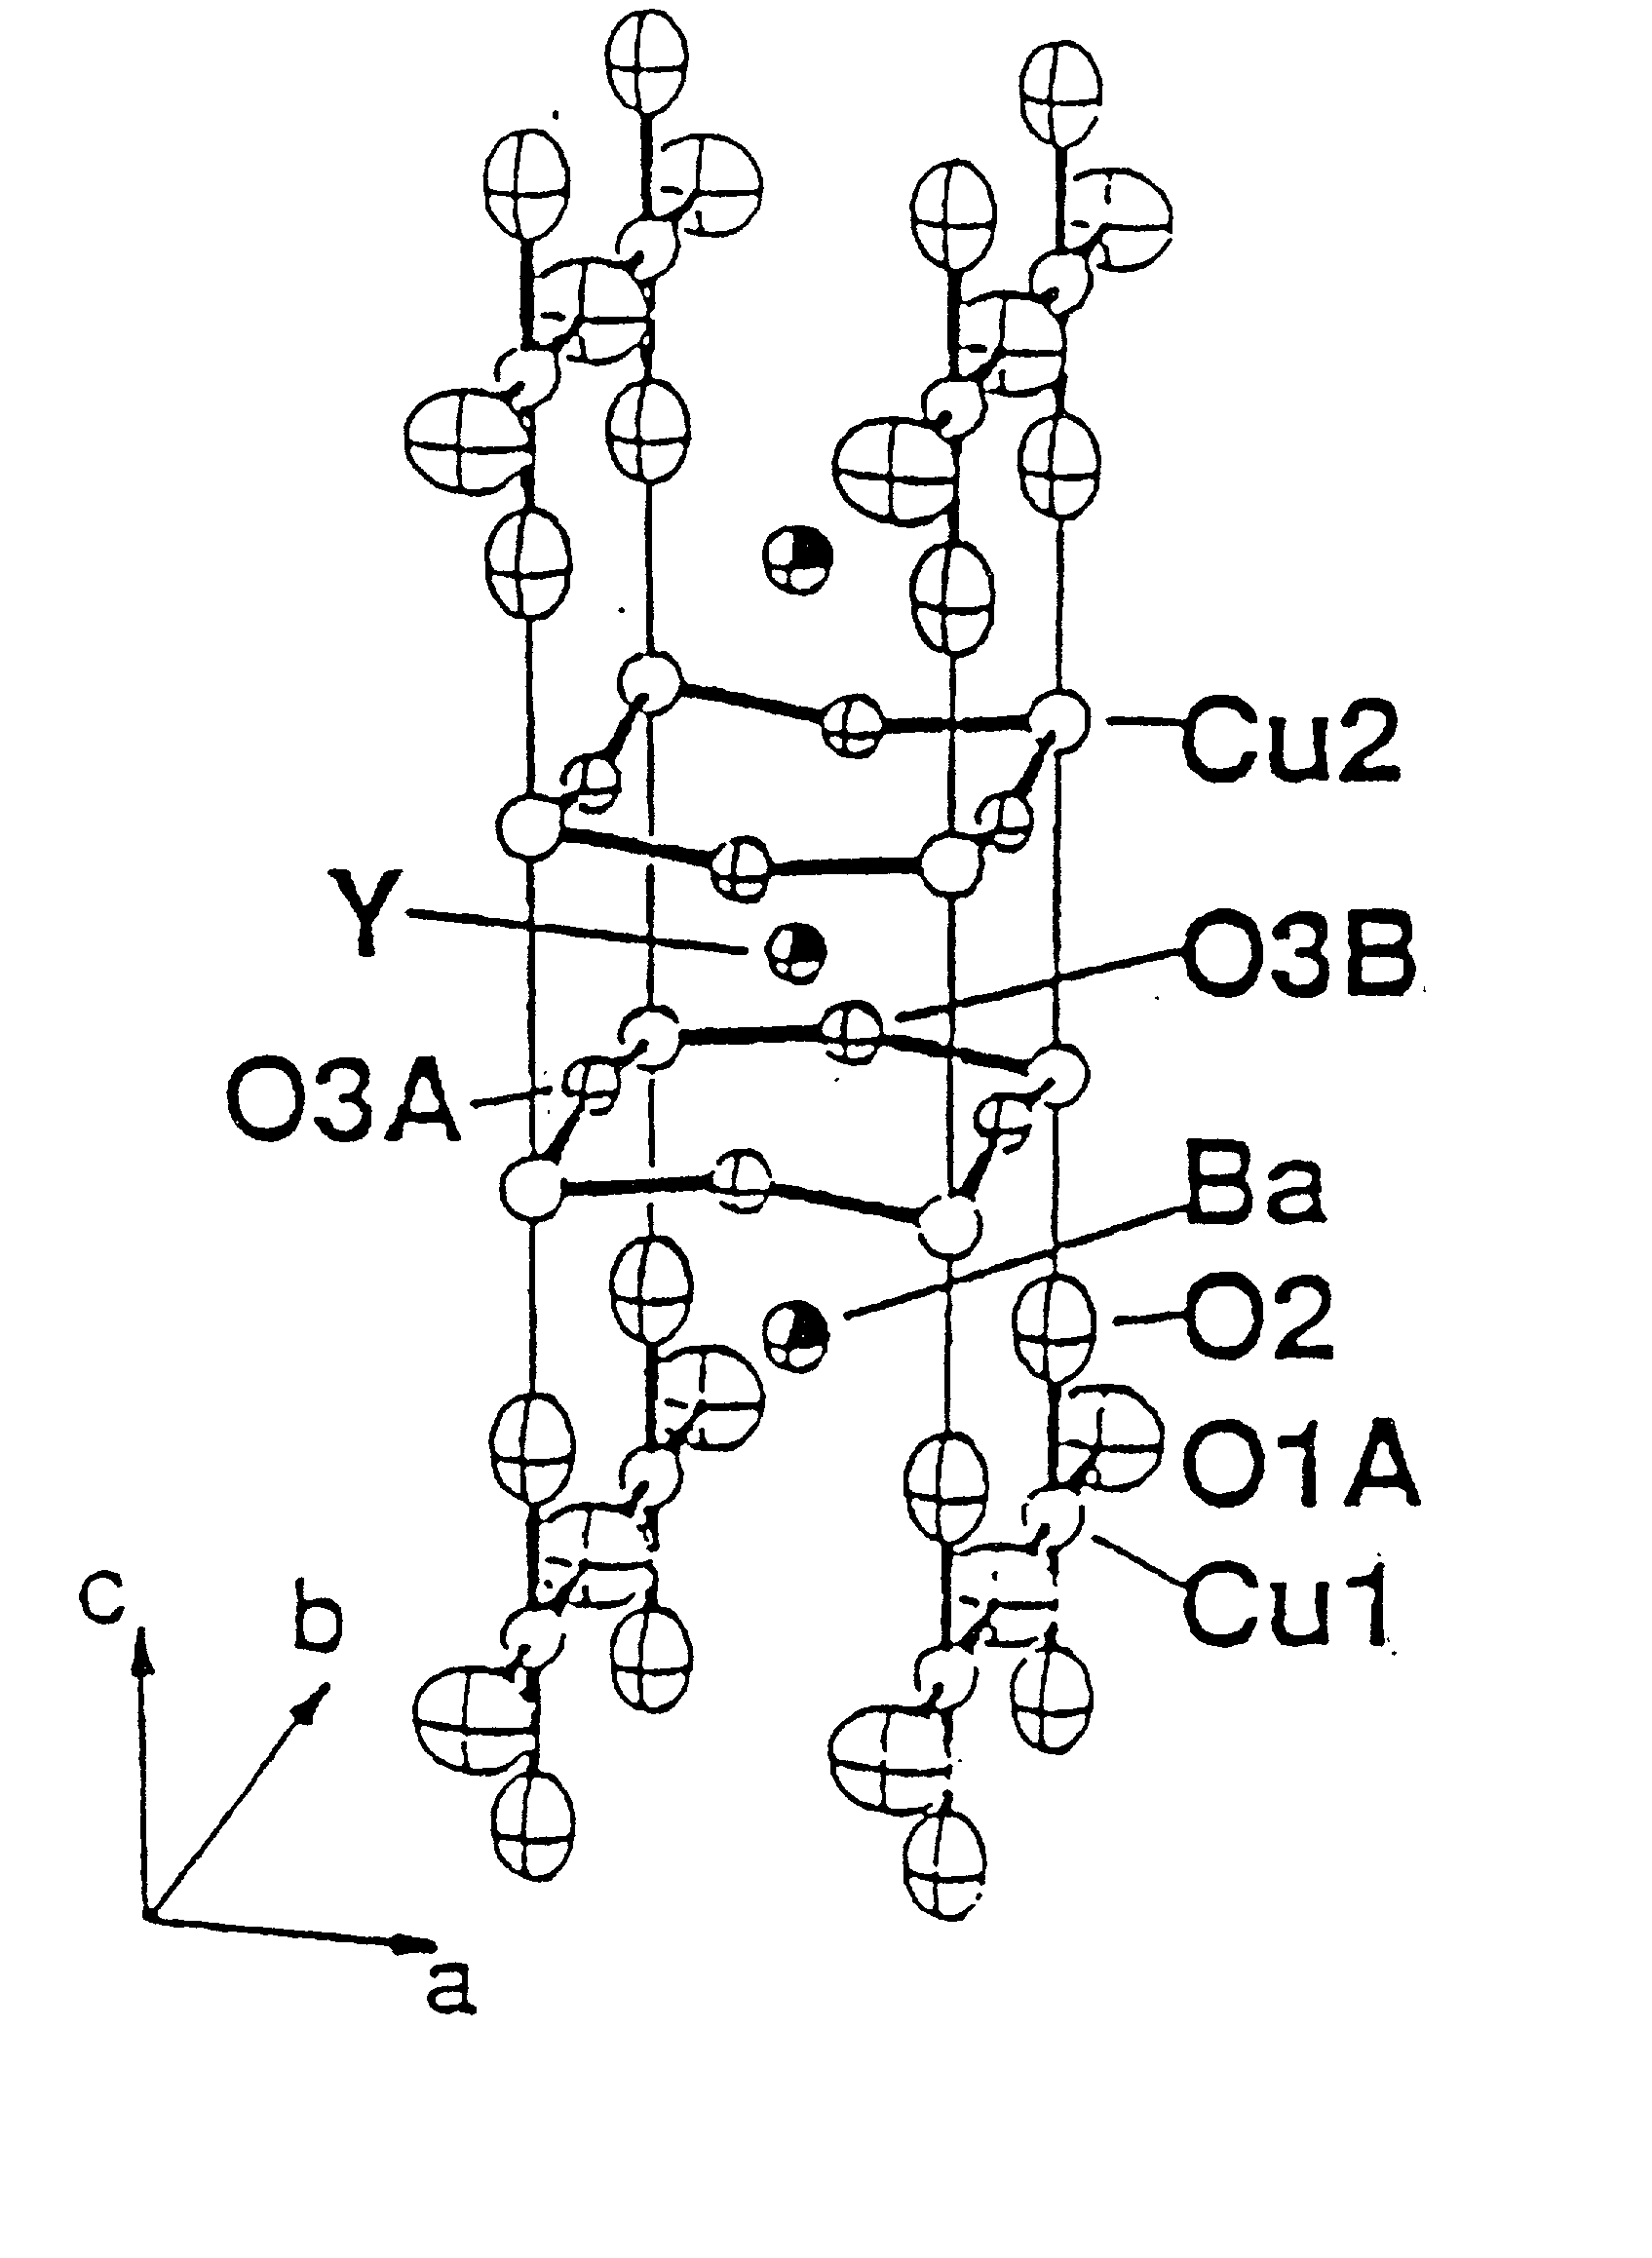 Method of producing textured superconducting oxide bodies by the oxidation/annealing of thin metallic precursors and precursors and superconducting bodies produced by the method